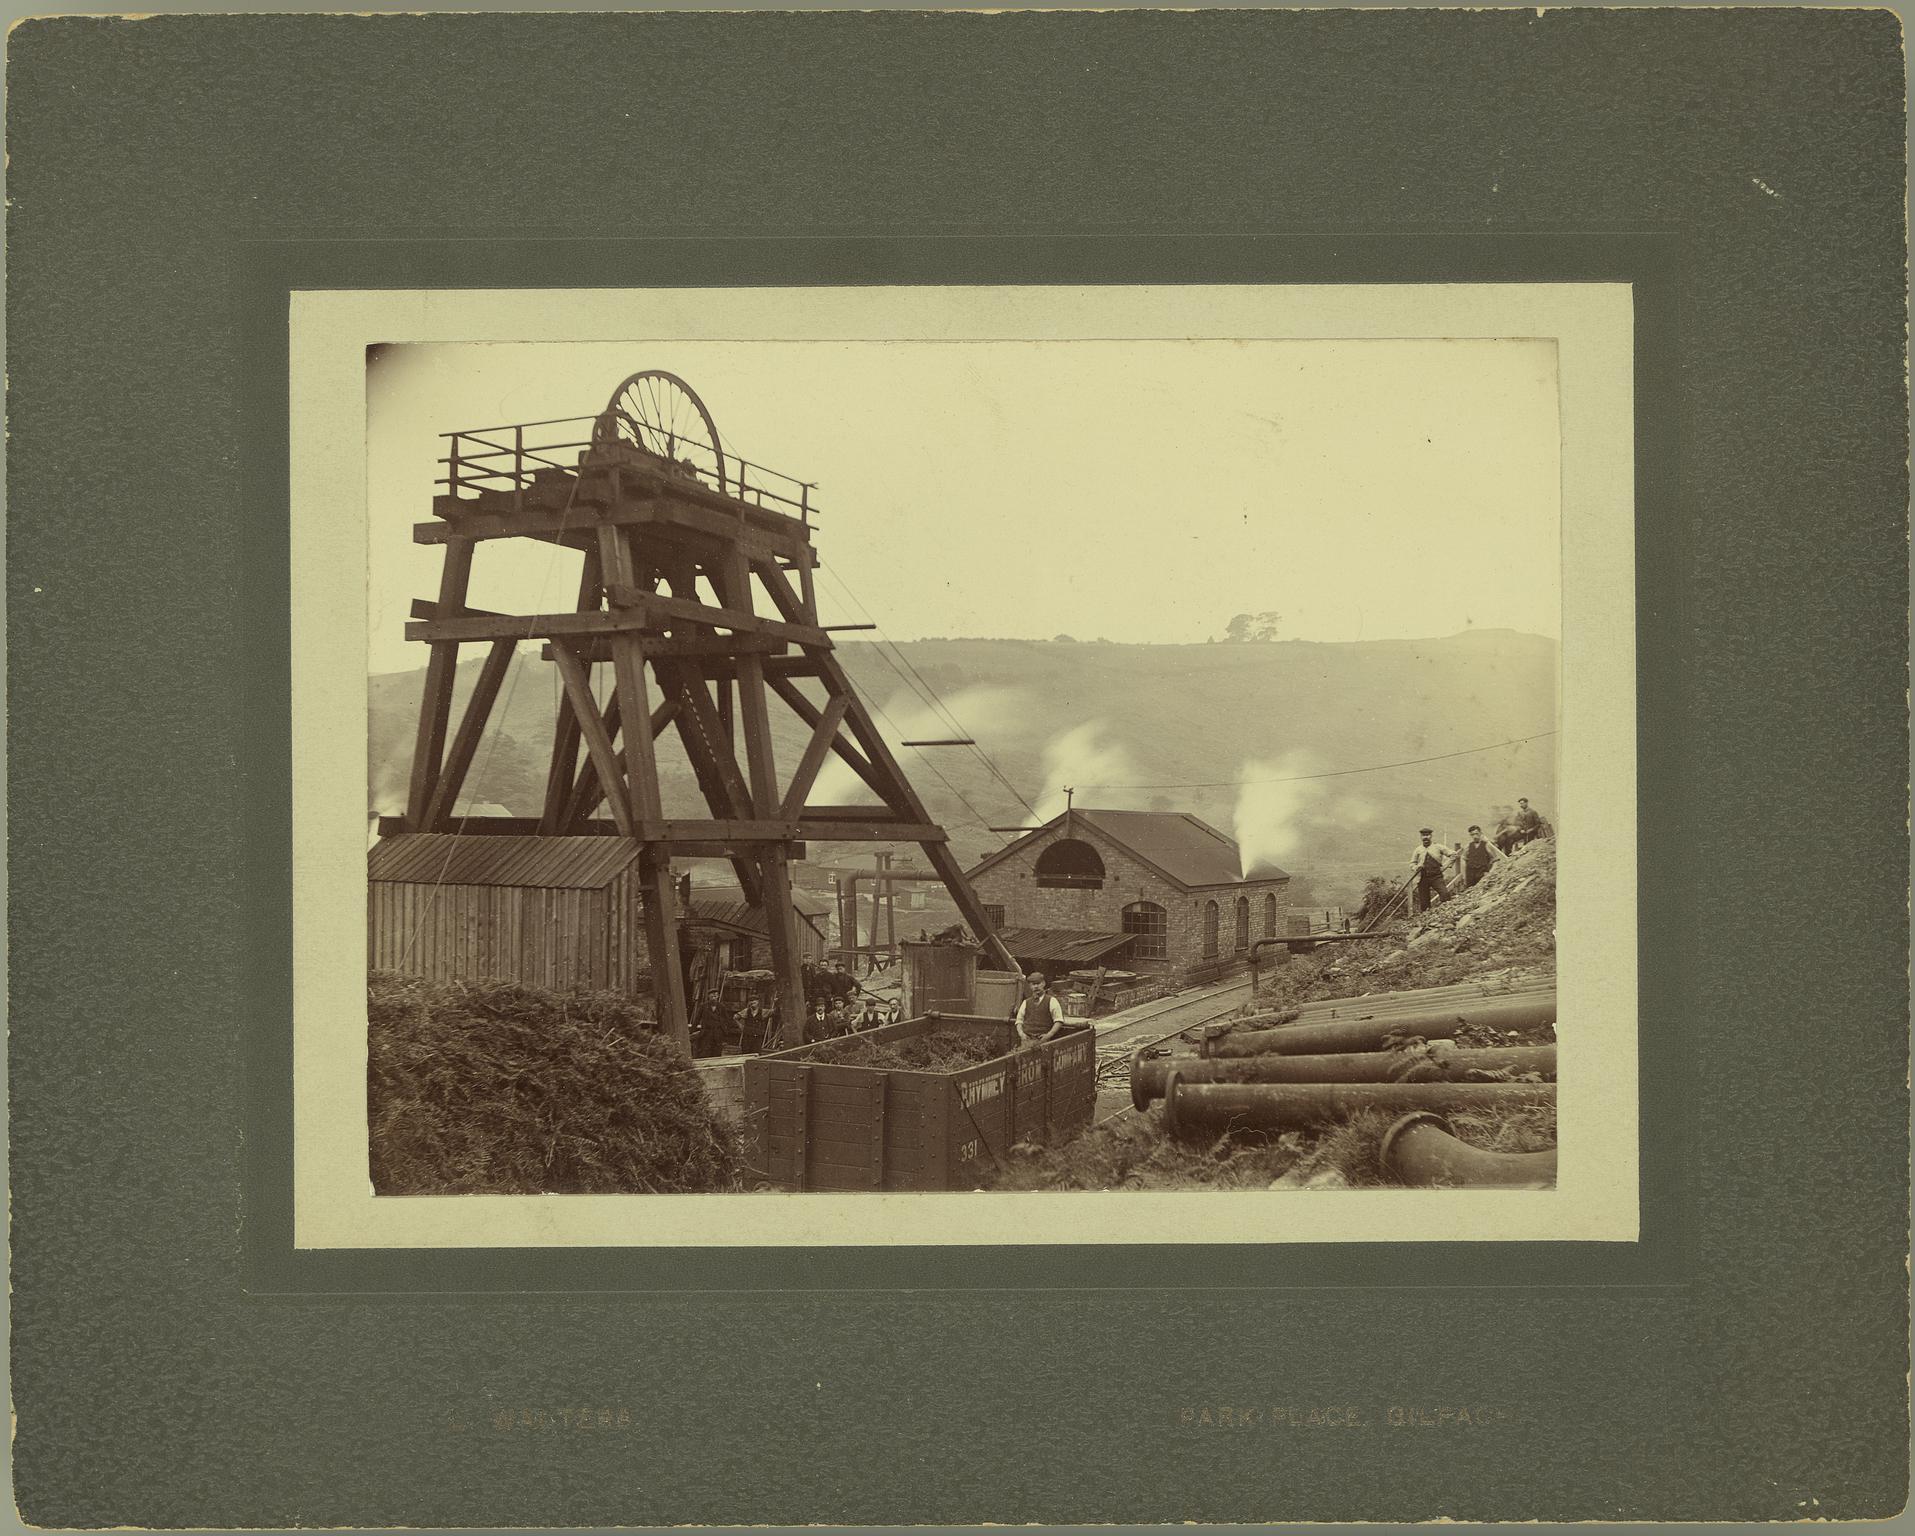 Groesfaen Colliery, photograph